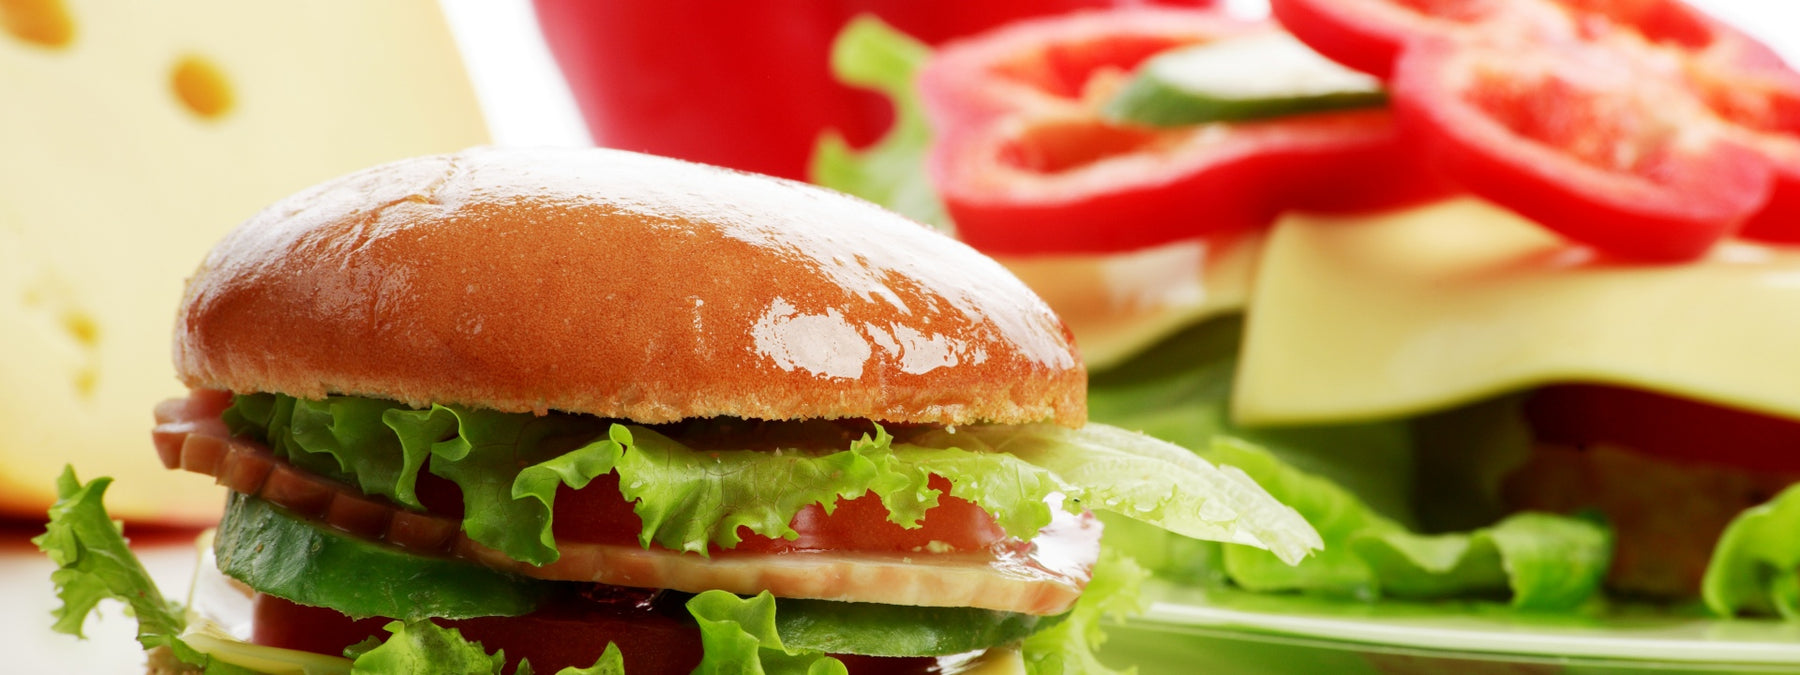 10 Best Fast Food Choices For Dieters